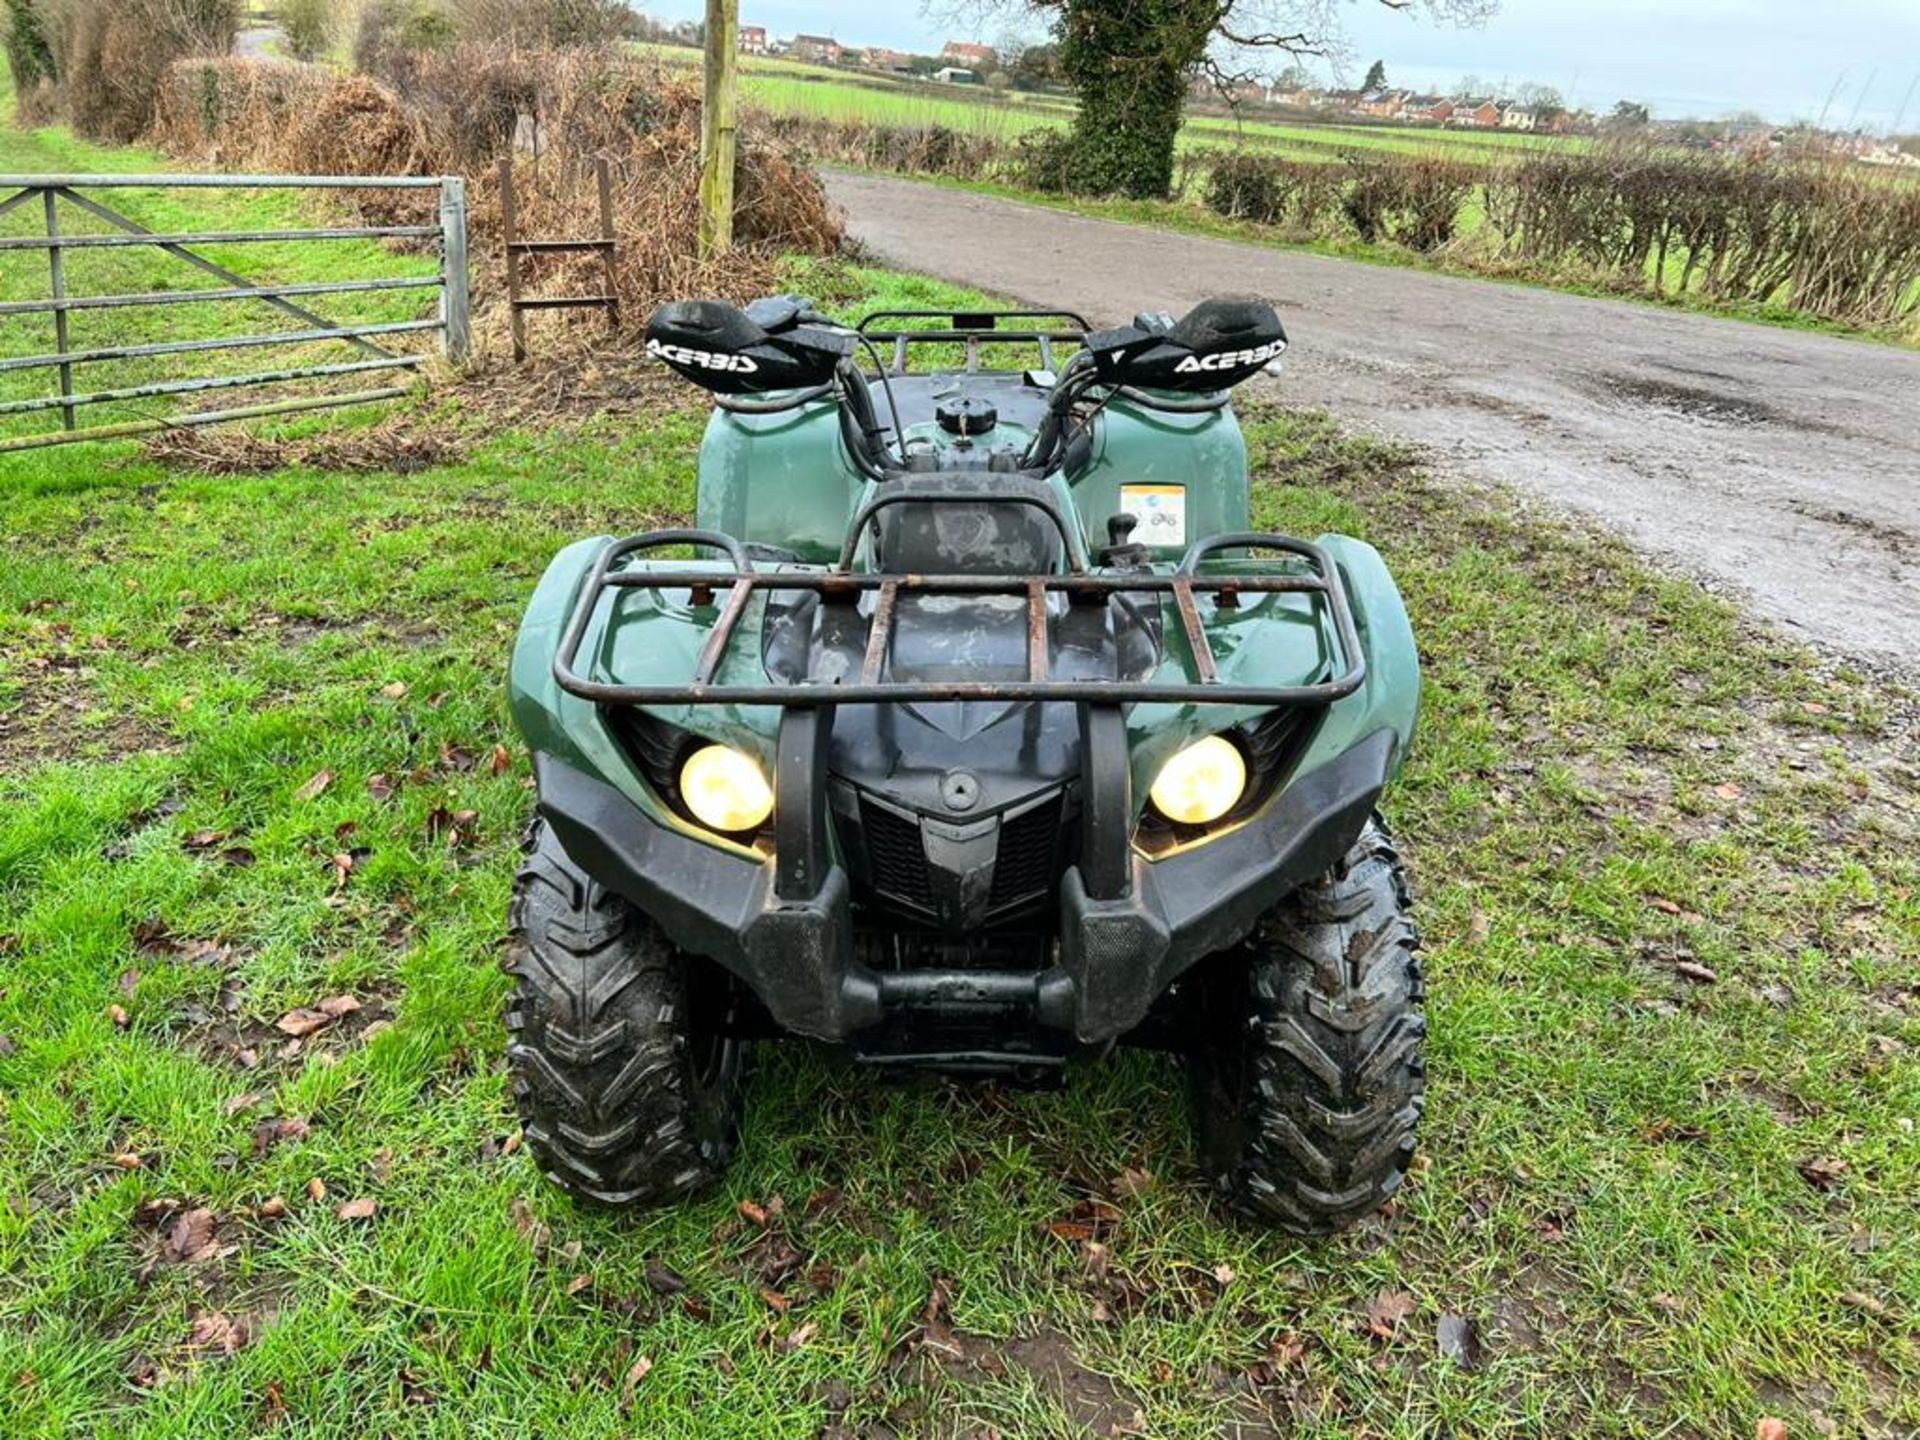 2012 YAMAHA GRIZZLY 450cc FARM QUAD, RUNS AND DRIVES WELL, AGRICULTURAL REGISTERED *NO VAT* - Image 2 of 11